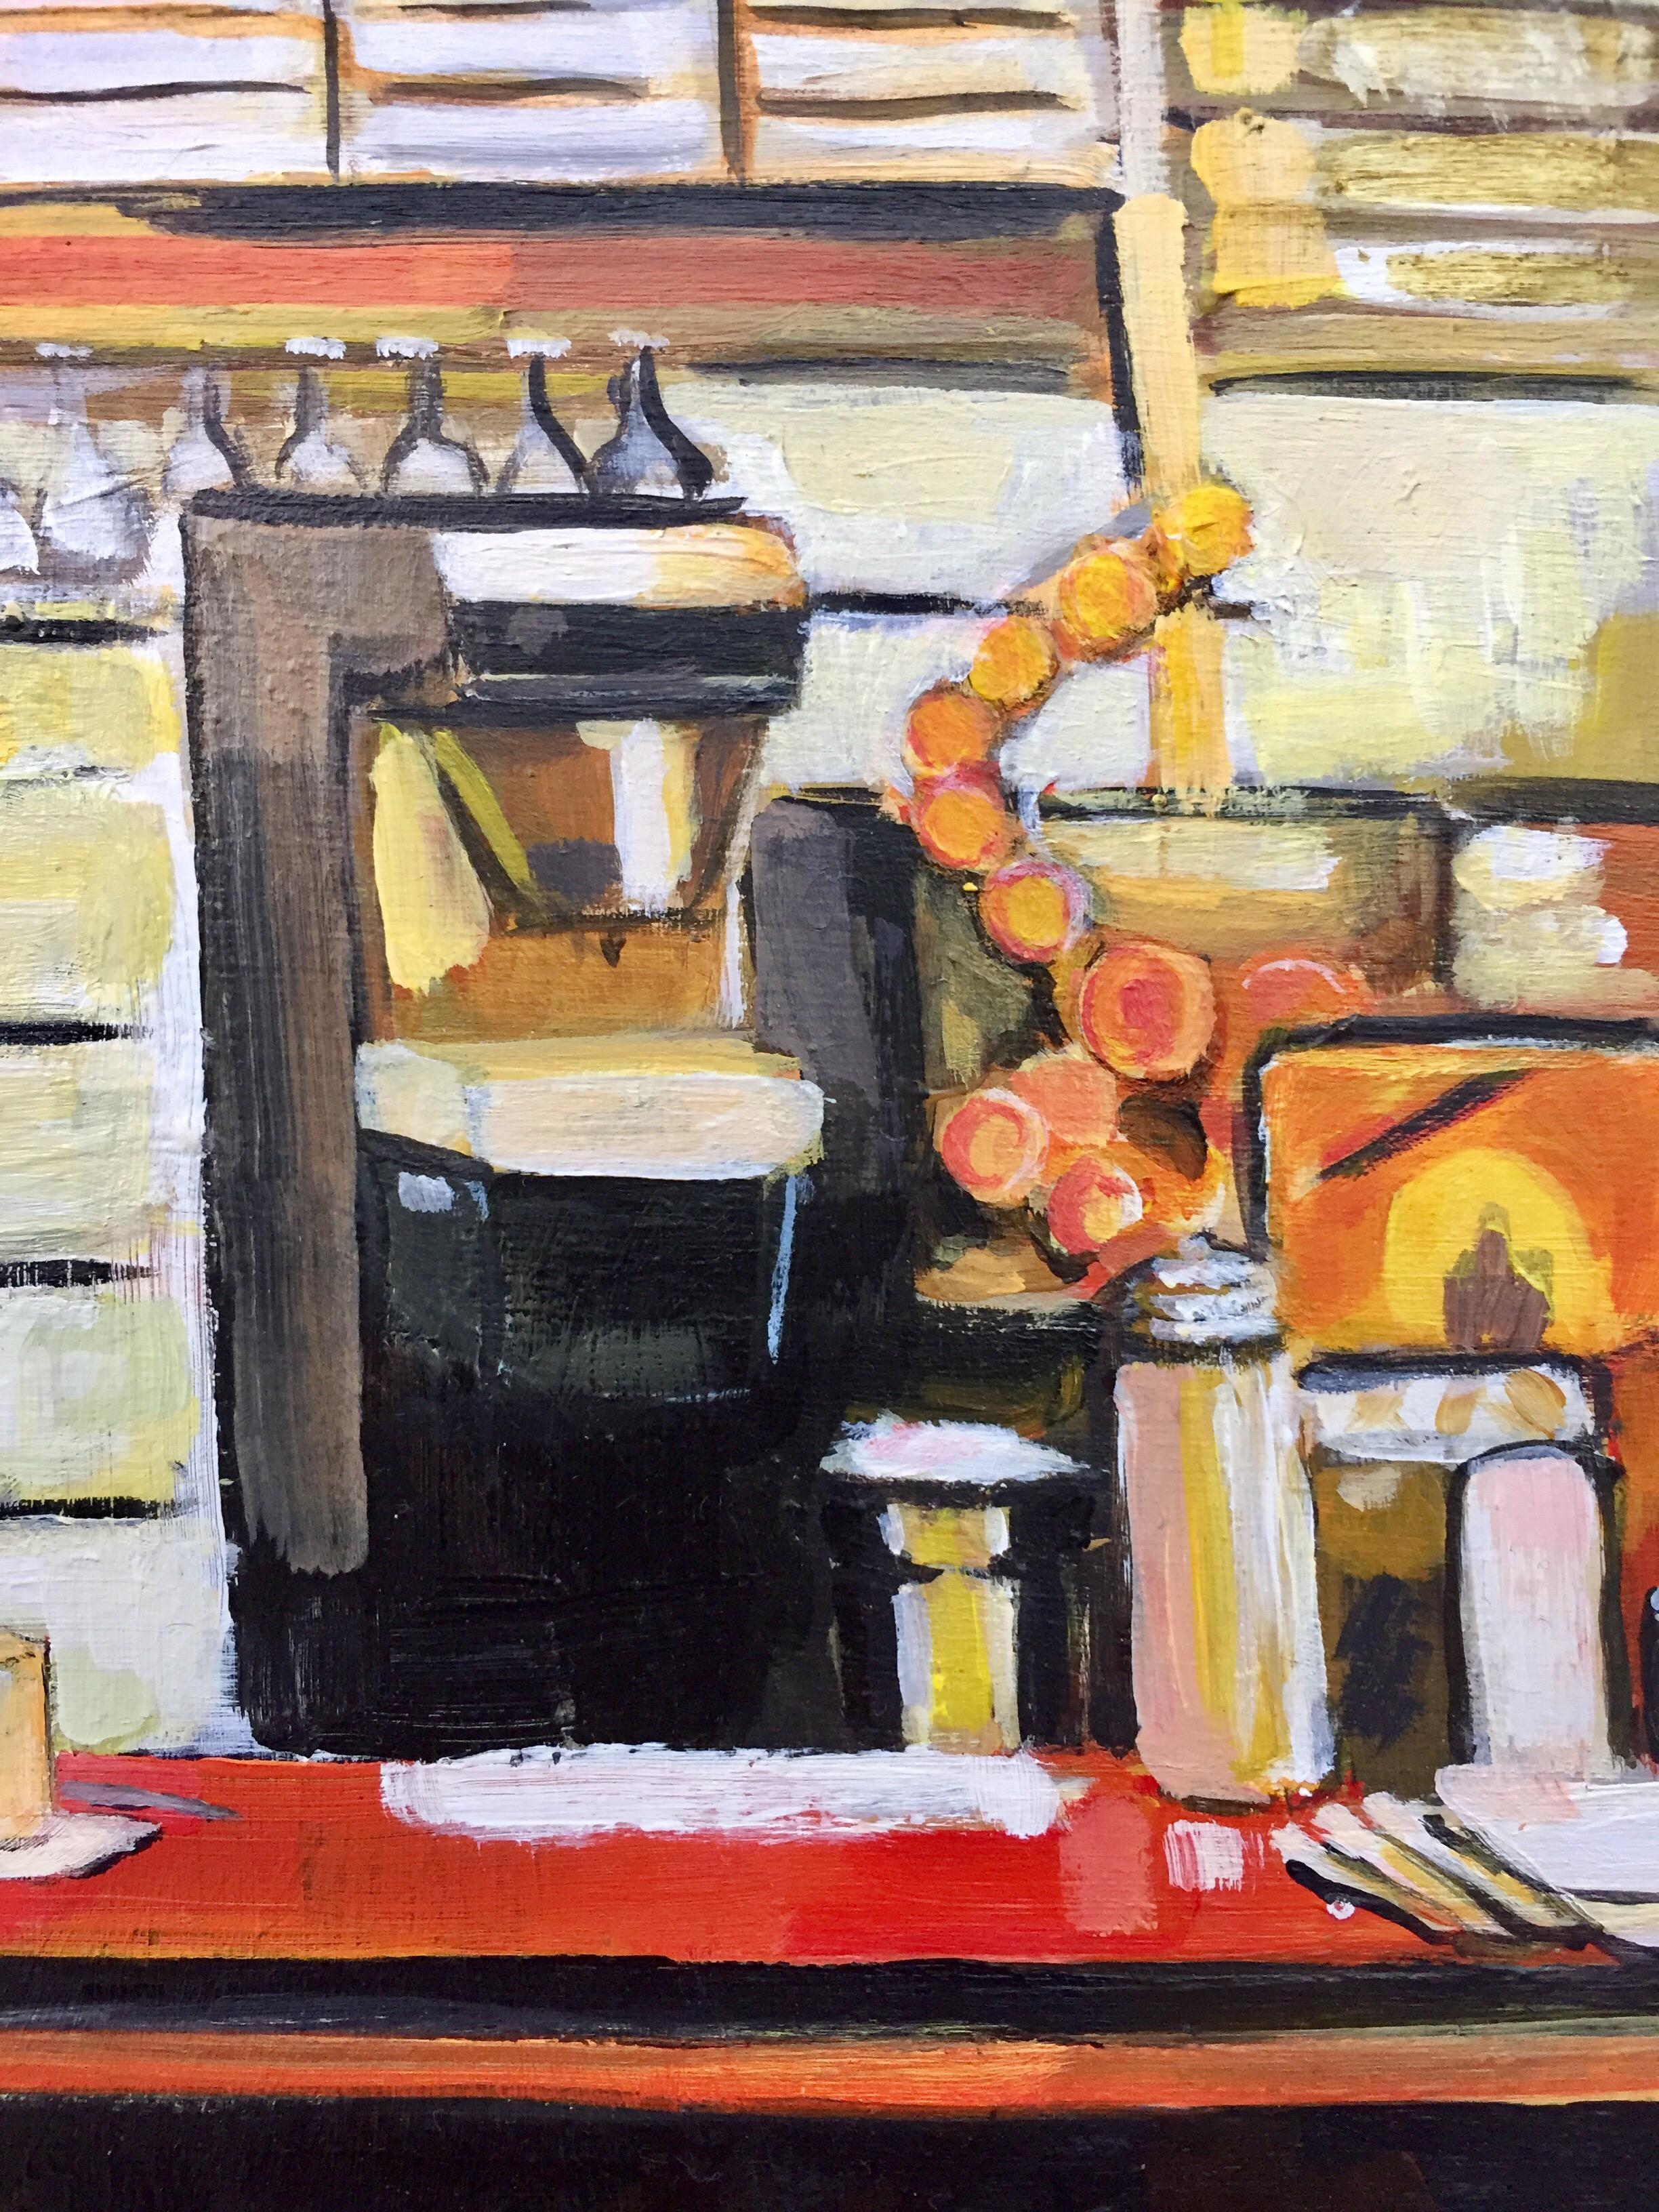 American Diner Still Life Painting by Leading British Urban Landscape Artist For Sale 3